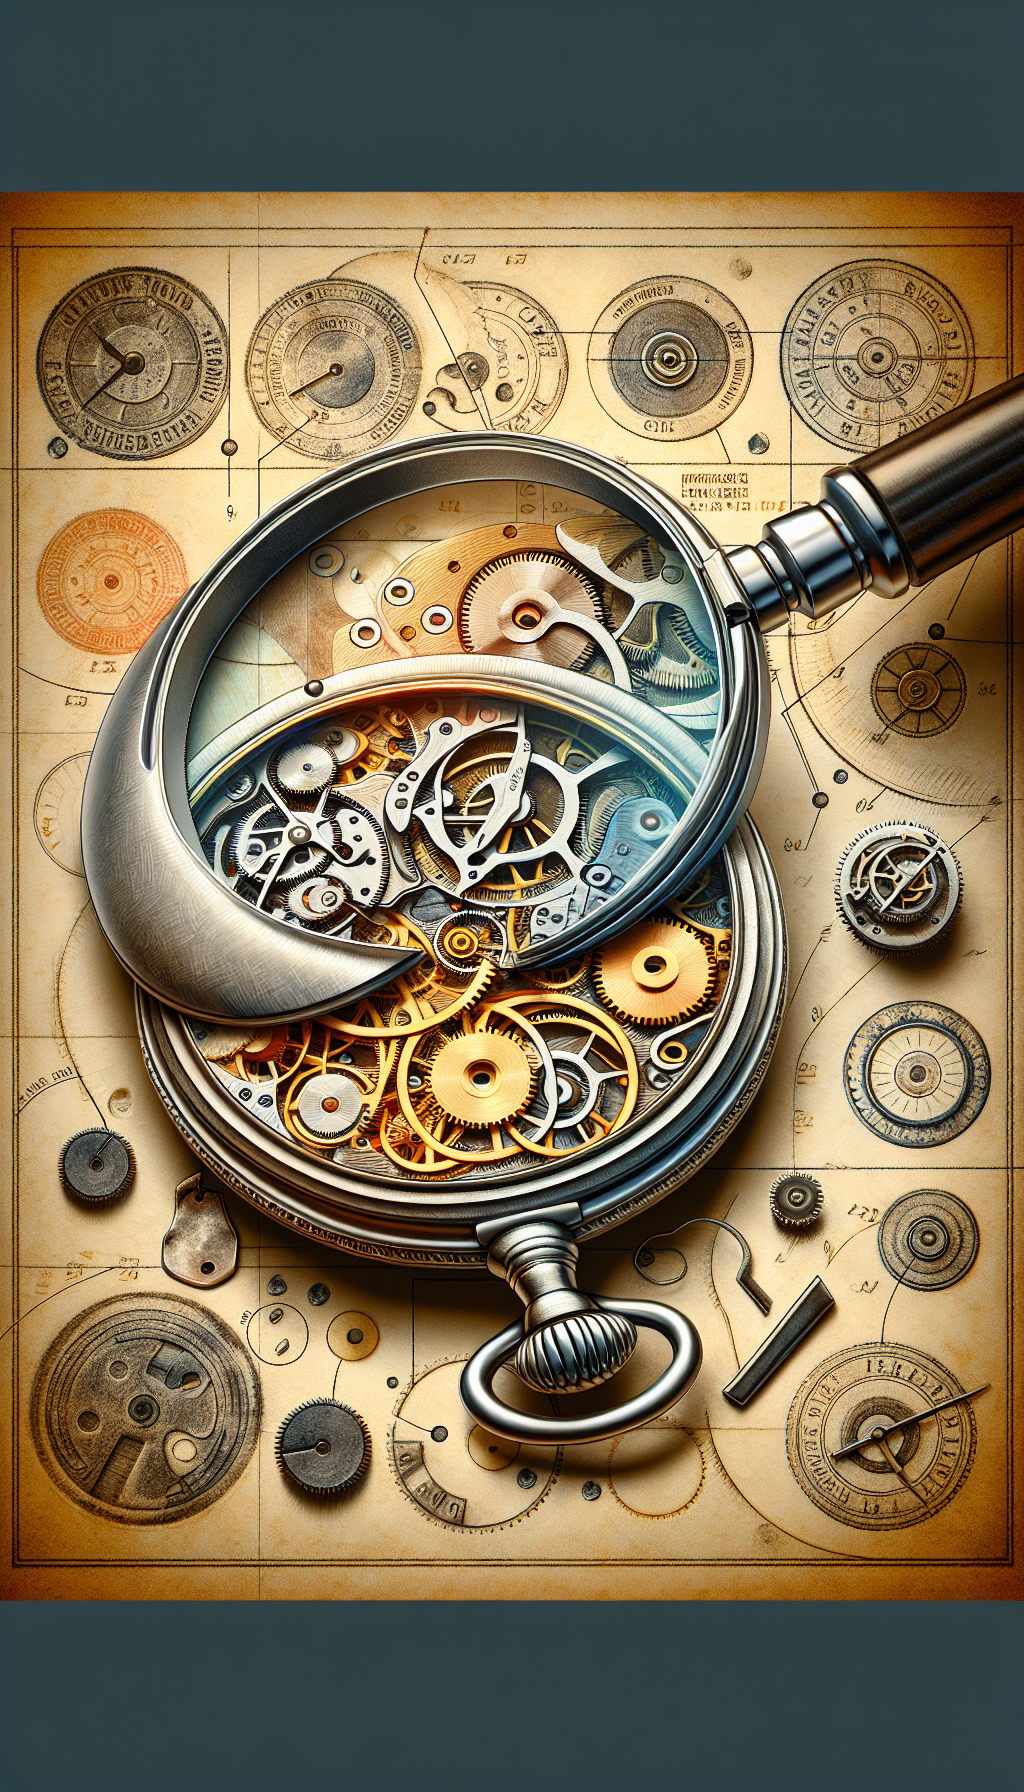 An illustration showcasing an open antique pocket watch, its intricate inner gears exposed, with a magnifying glass hovering above that transforms sections of the gears into high-resolution, colored cutaways, revealing the unique craftsmanship and material quality. Around the watch, faded stamps mark 'silver', 'gold', 'hand-engraved', embodying the process of authenticating and identifying the antique's value and origin.